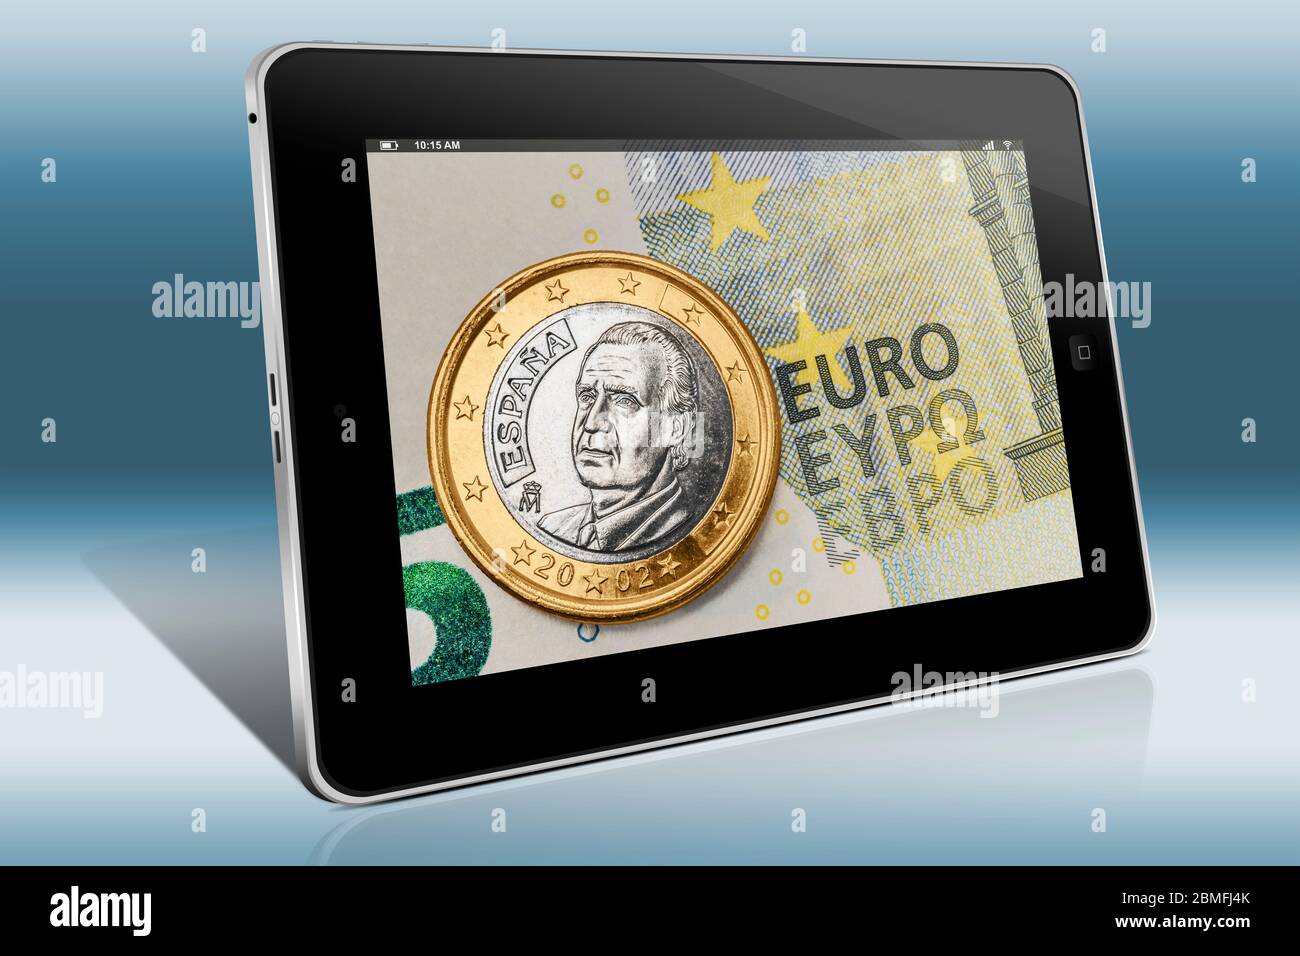 a 1 euro coin from Austria on a 5 euro banknote, view on a Tablet PC Stock Photo